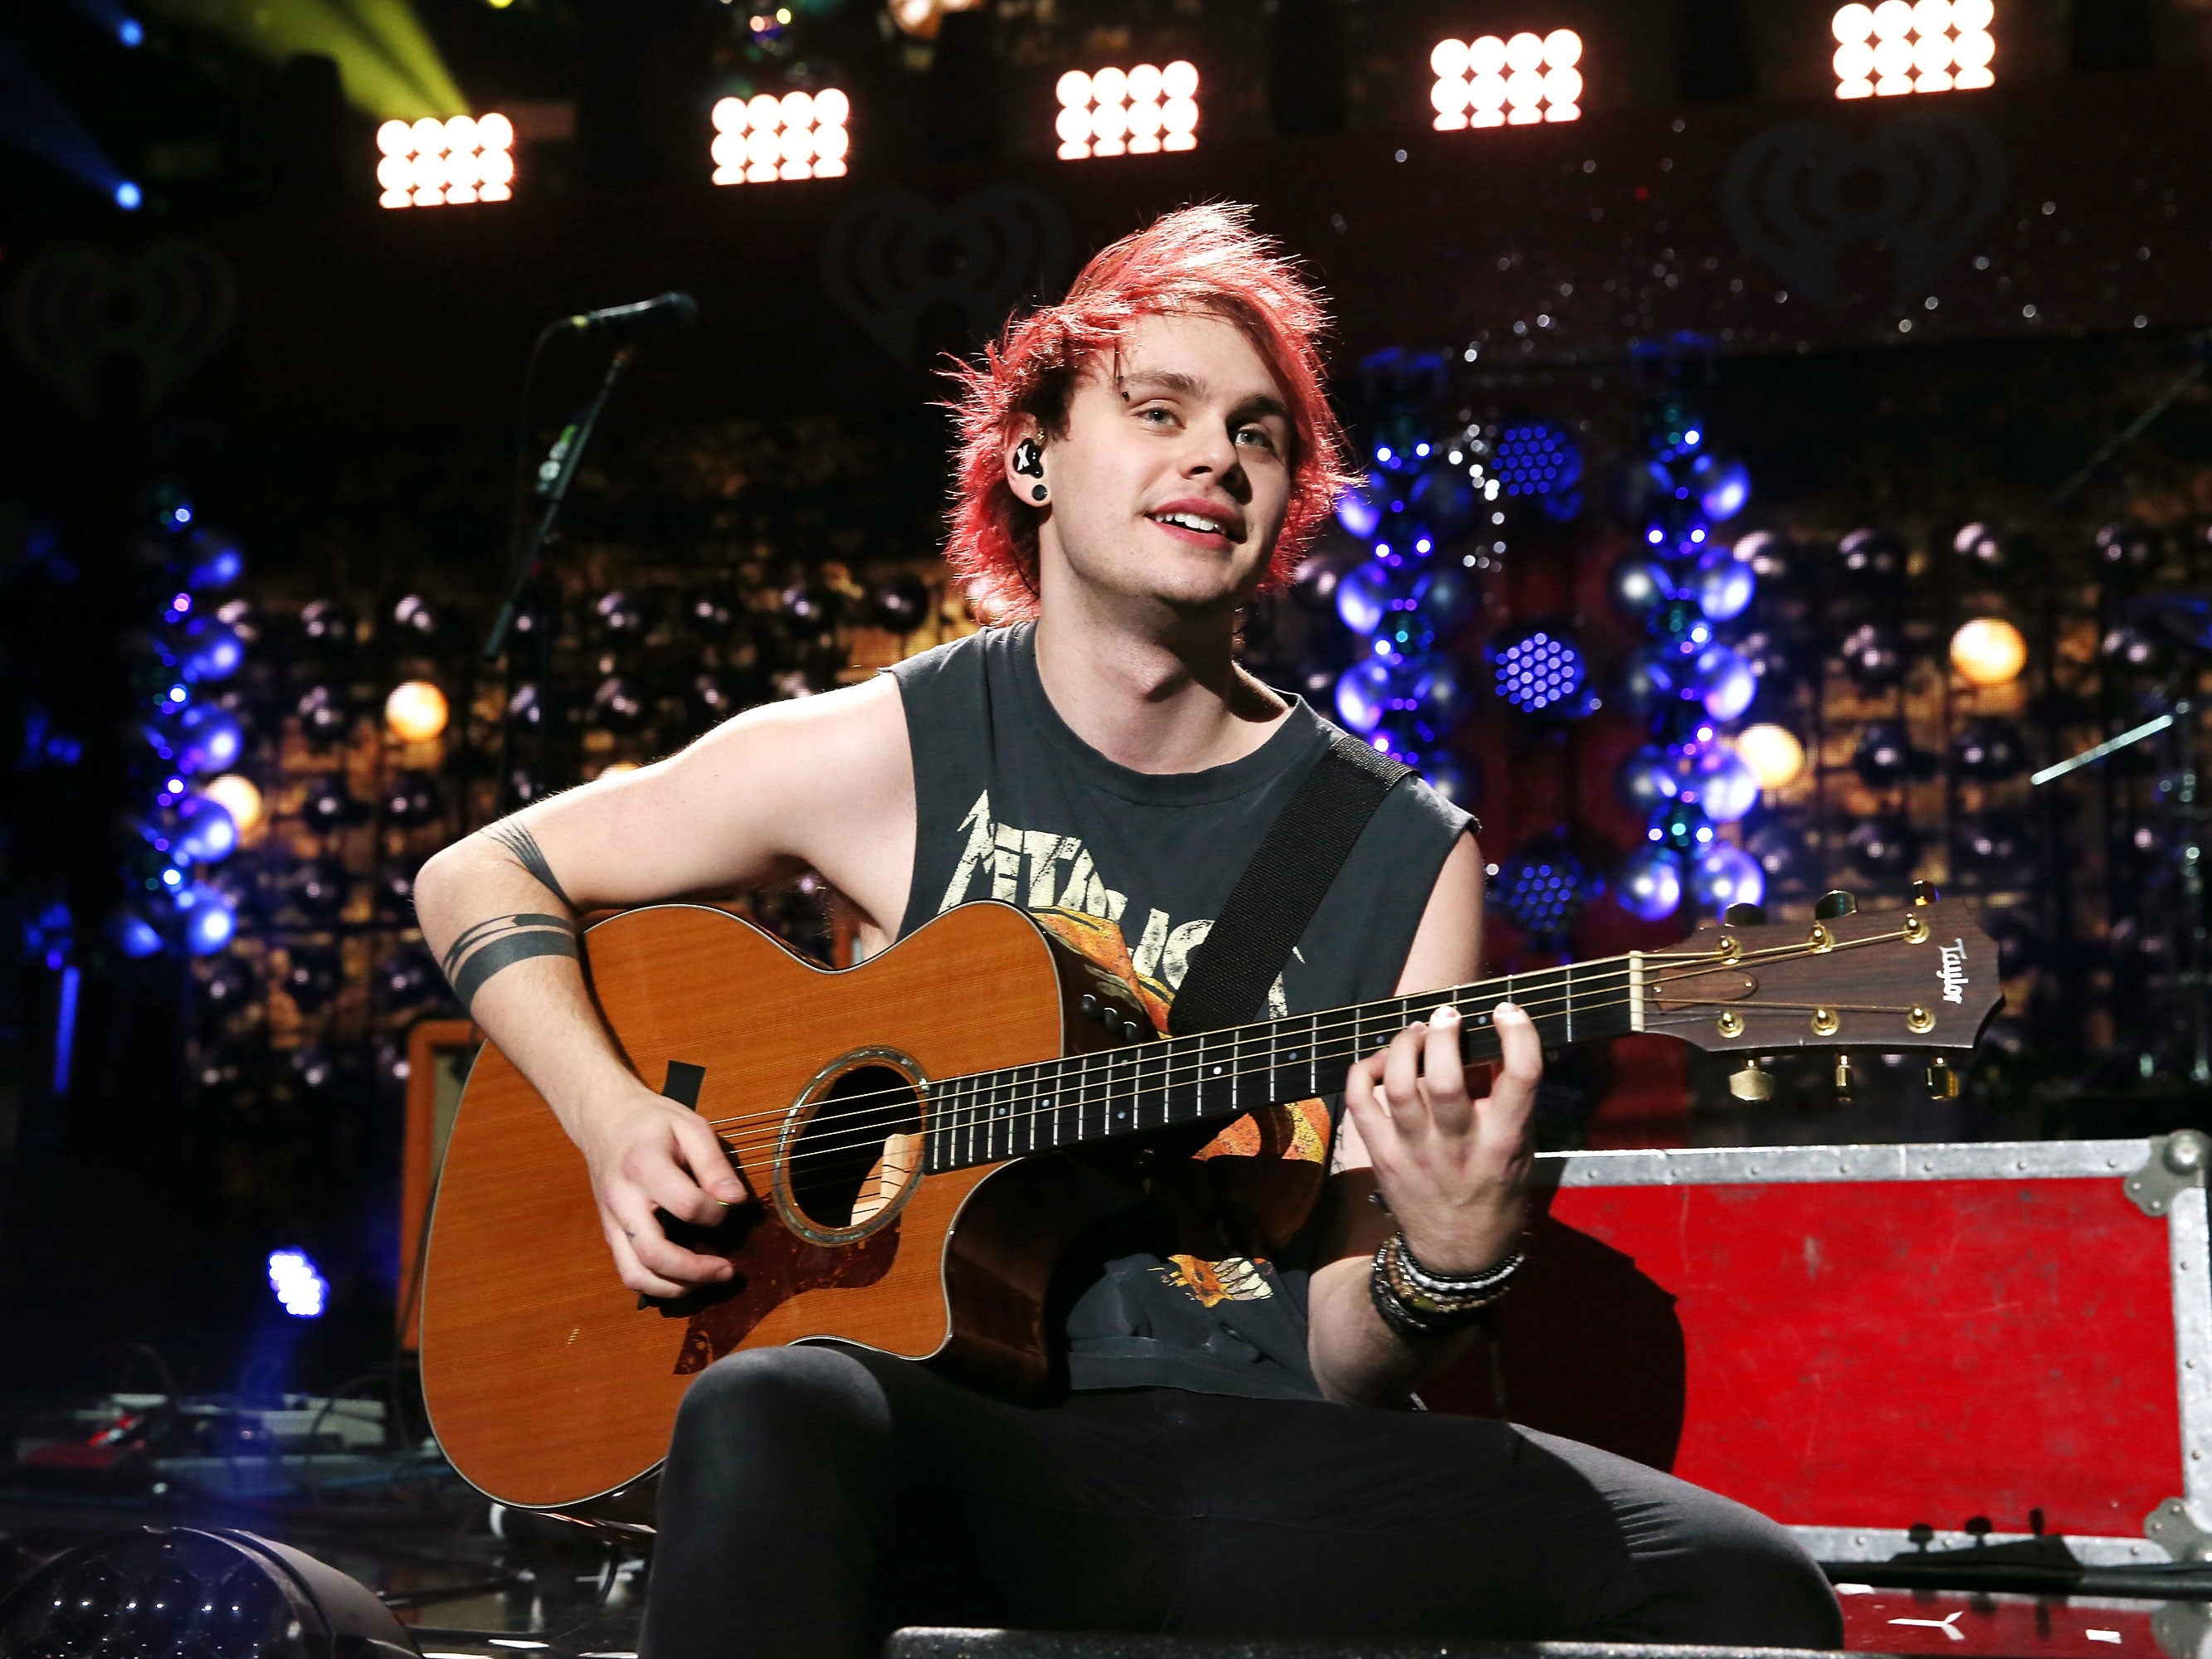 5 Seconds Of Summer Guitarist Michael Clifford Burnt On Stage As Hair